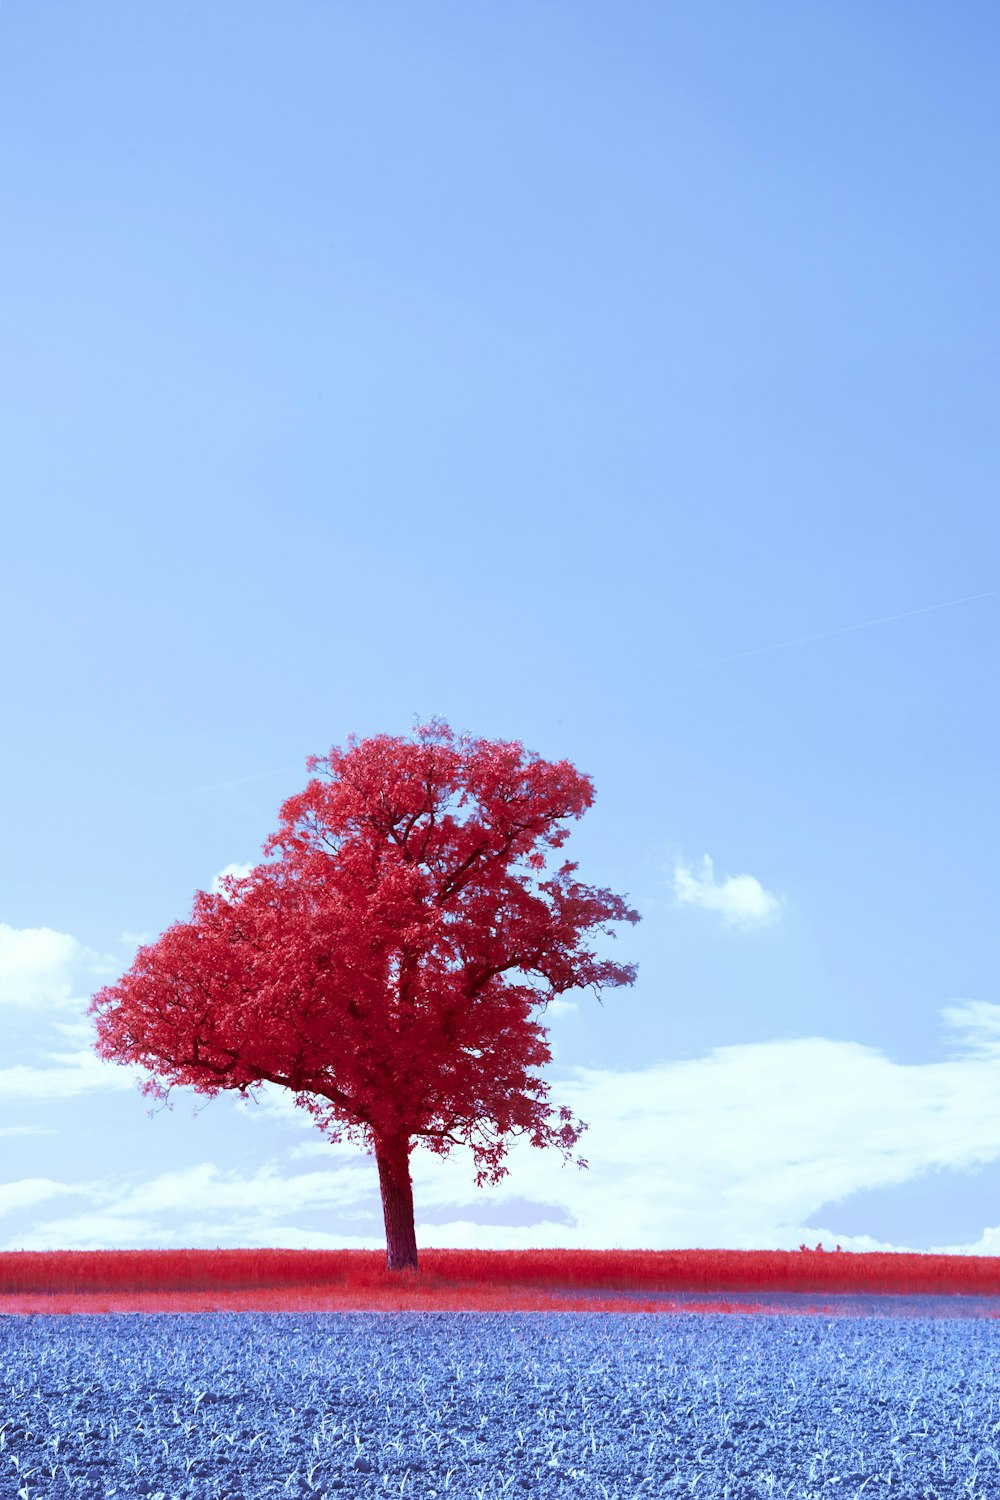 a lone red tree in a blue field